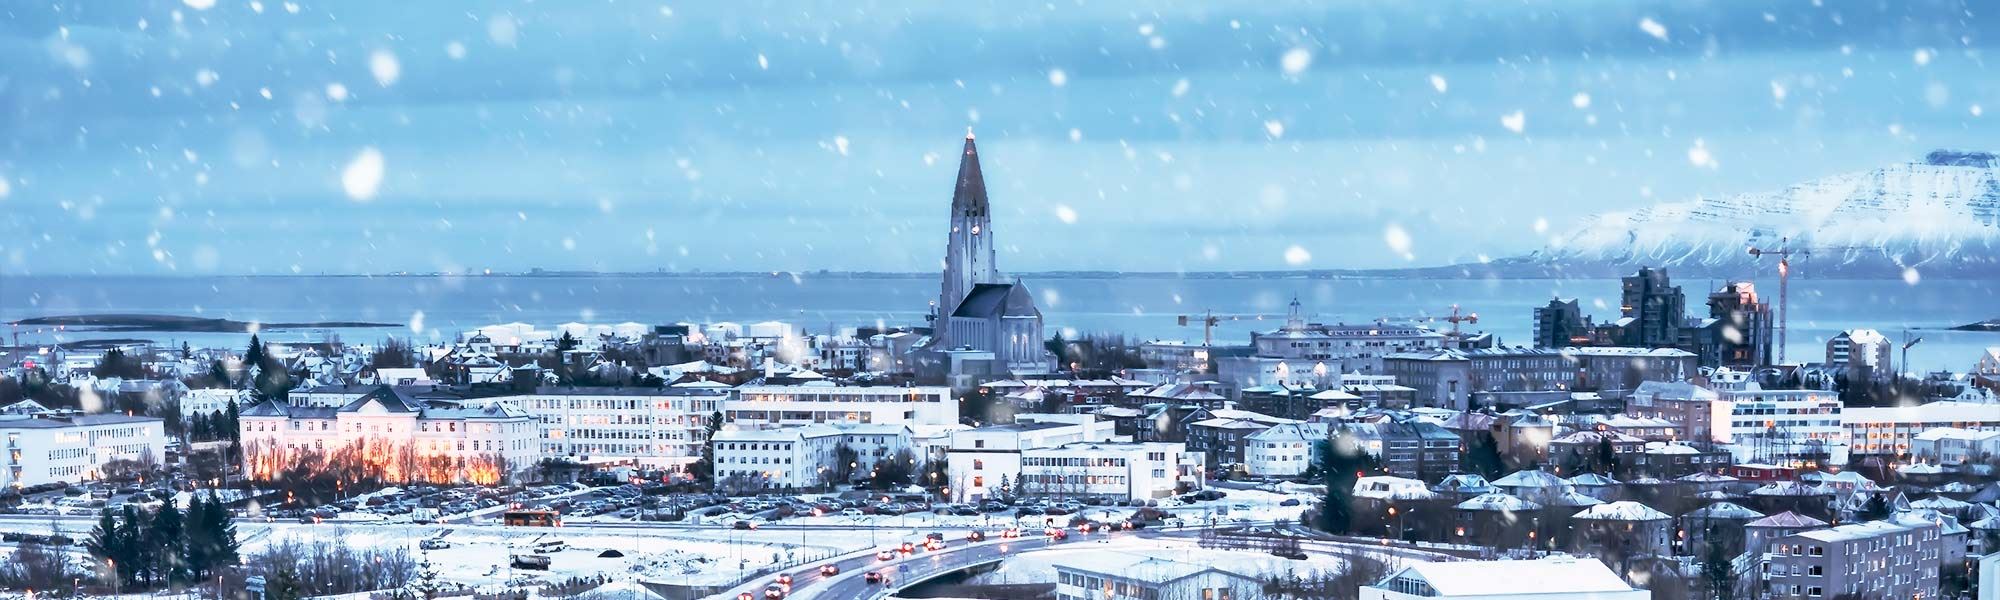 iceland trips new year